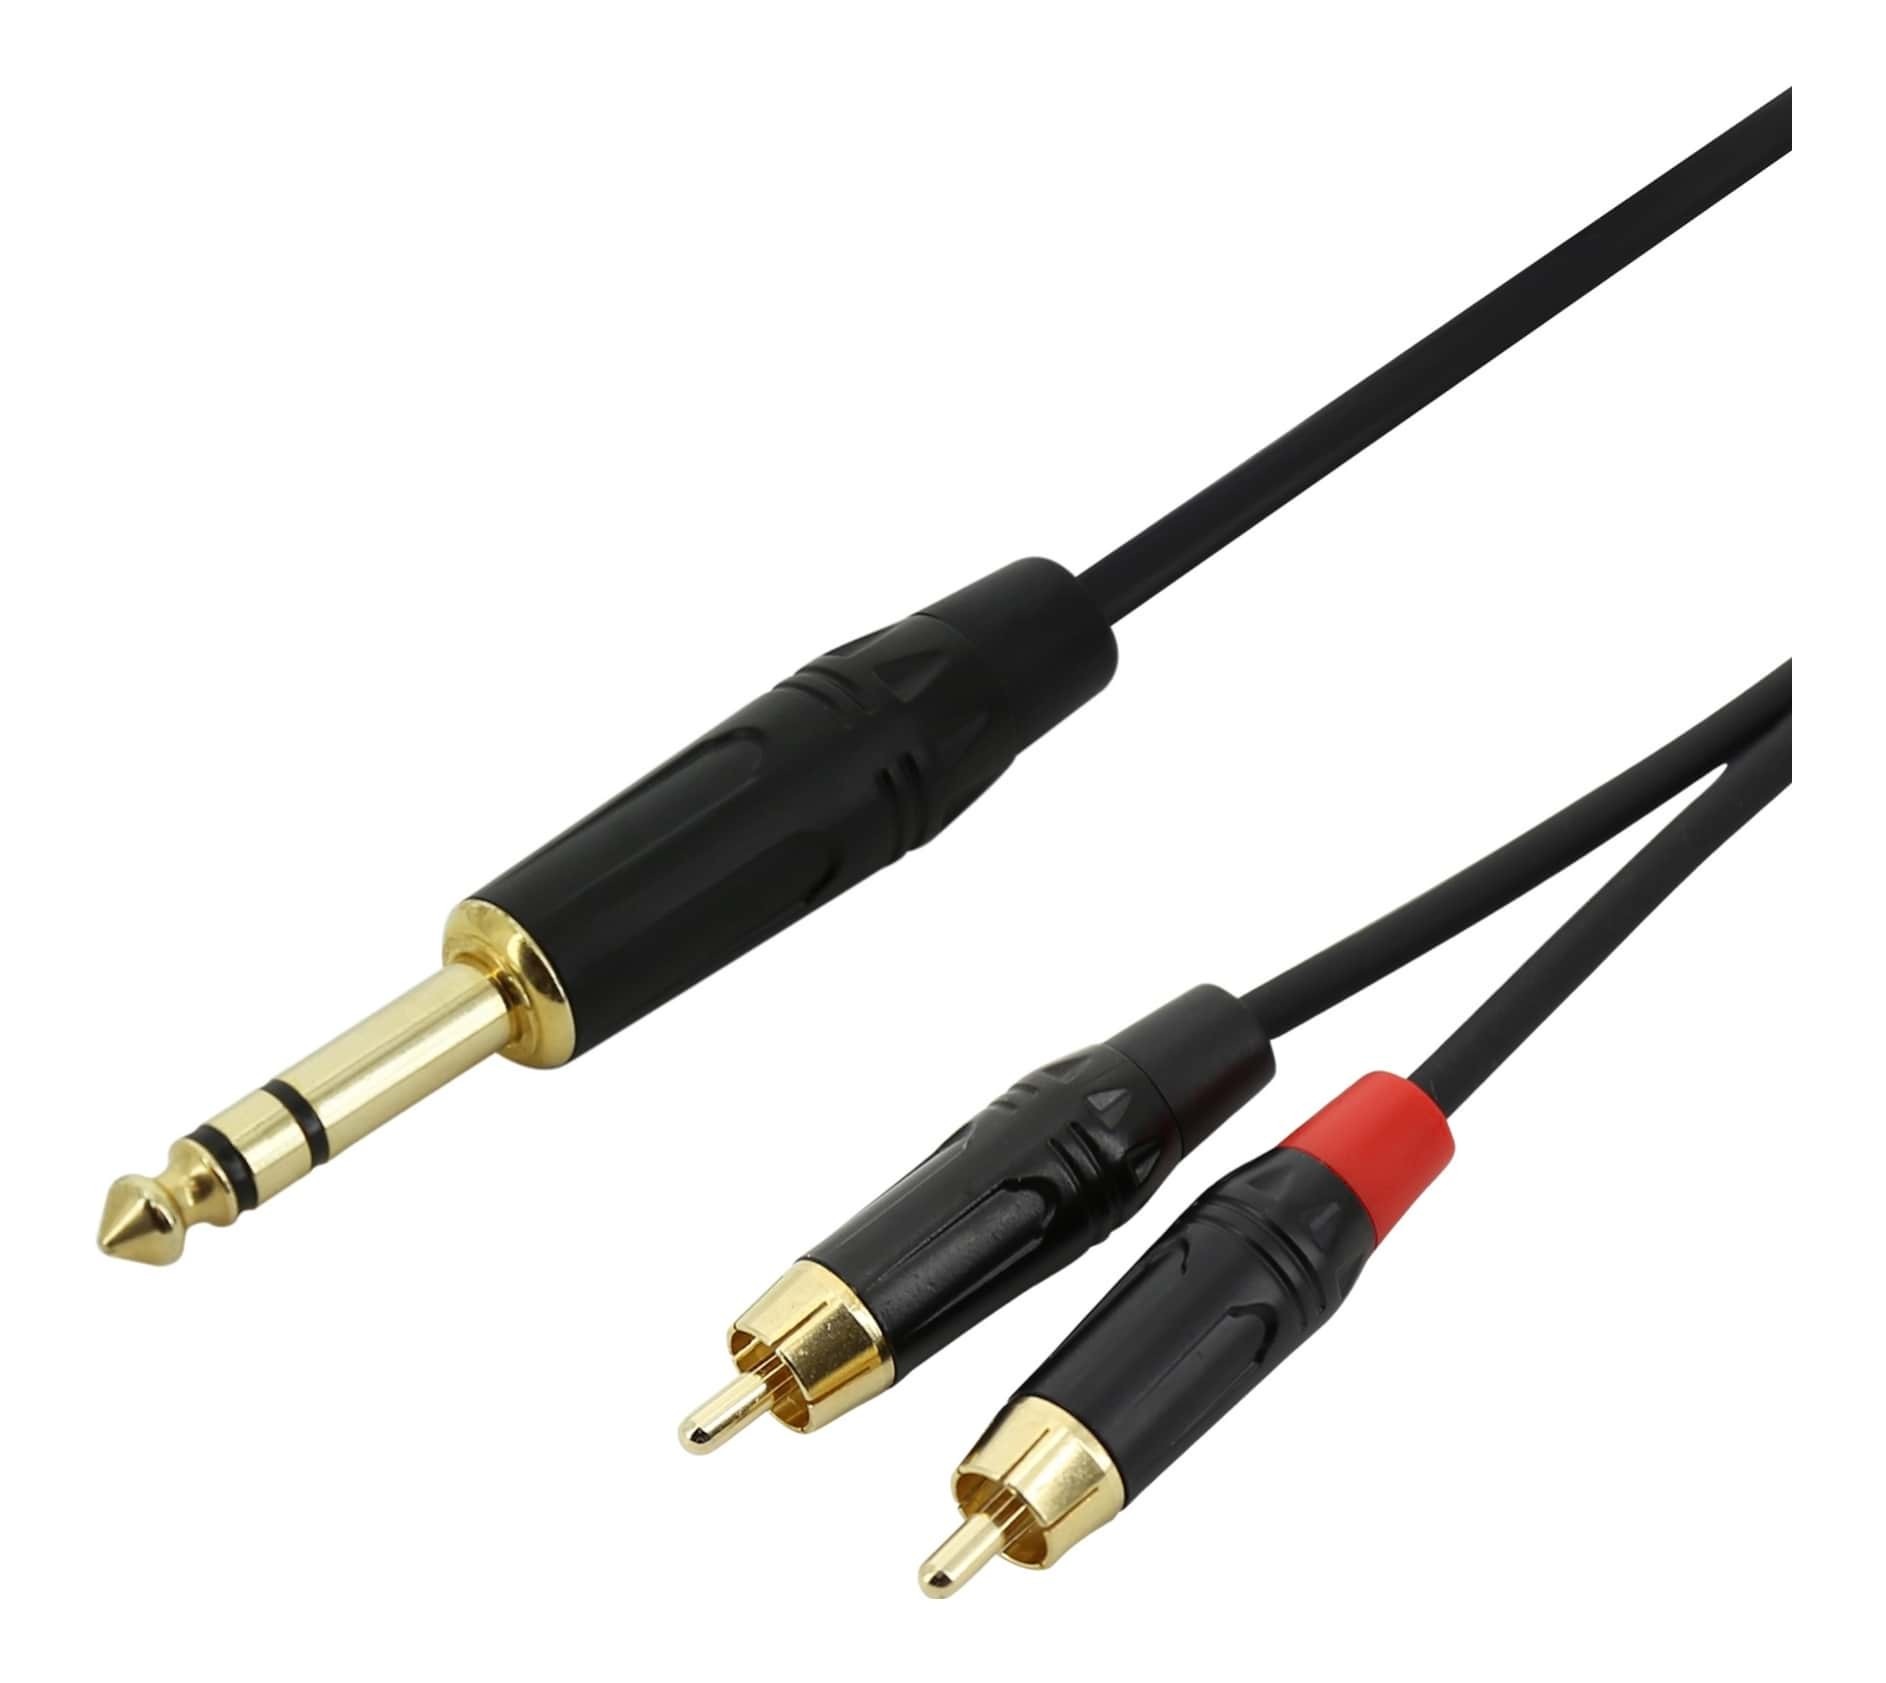 TRS Jack to Dual RCA Cable - Insert Y Cable - 5m